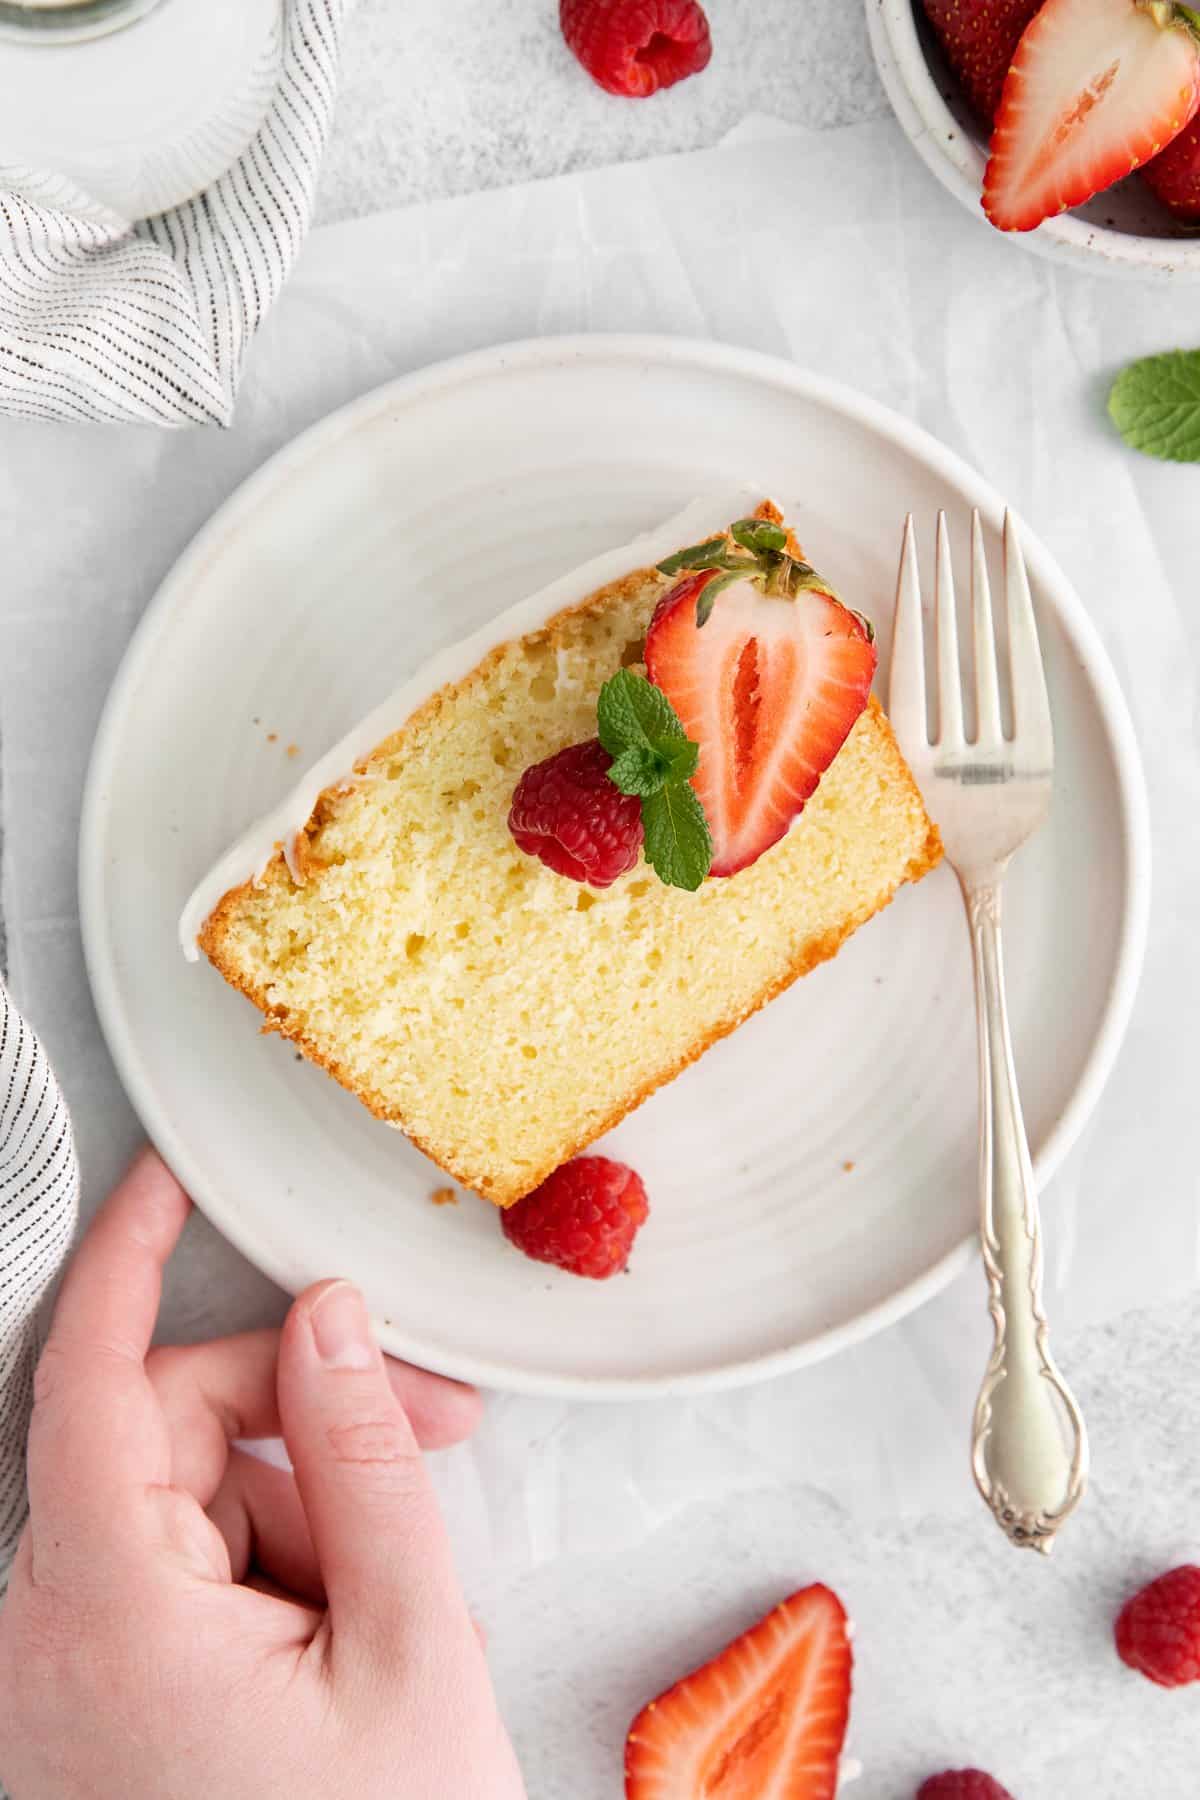 Slice of cream cheese pound cake on a plate.